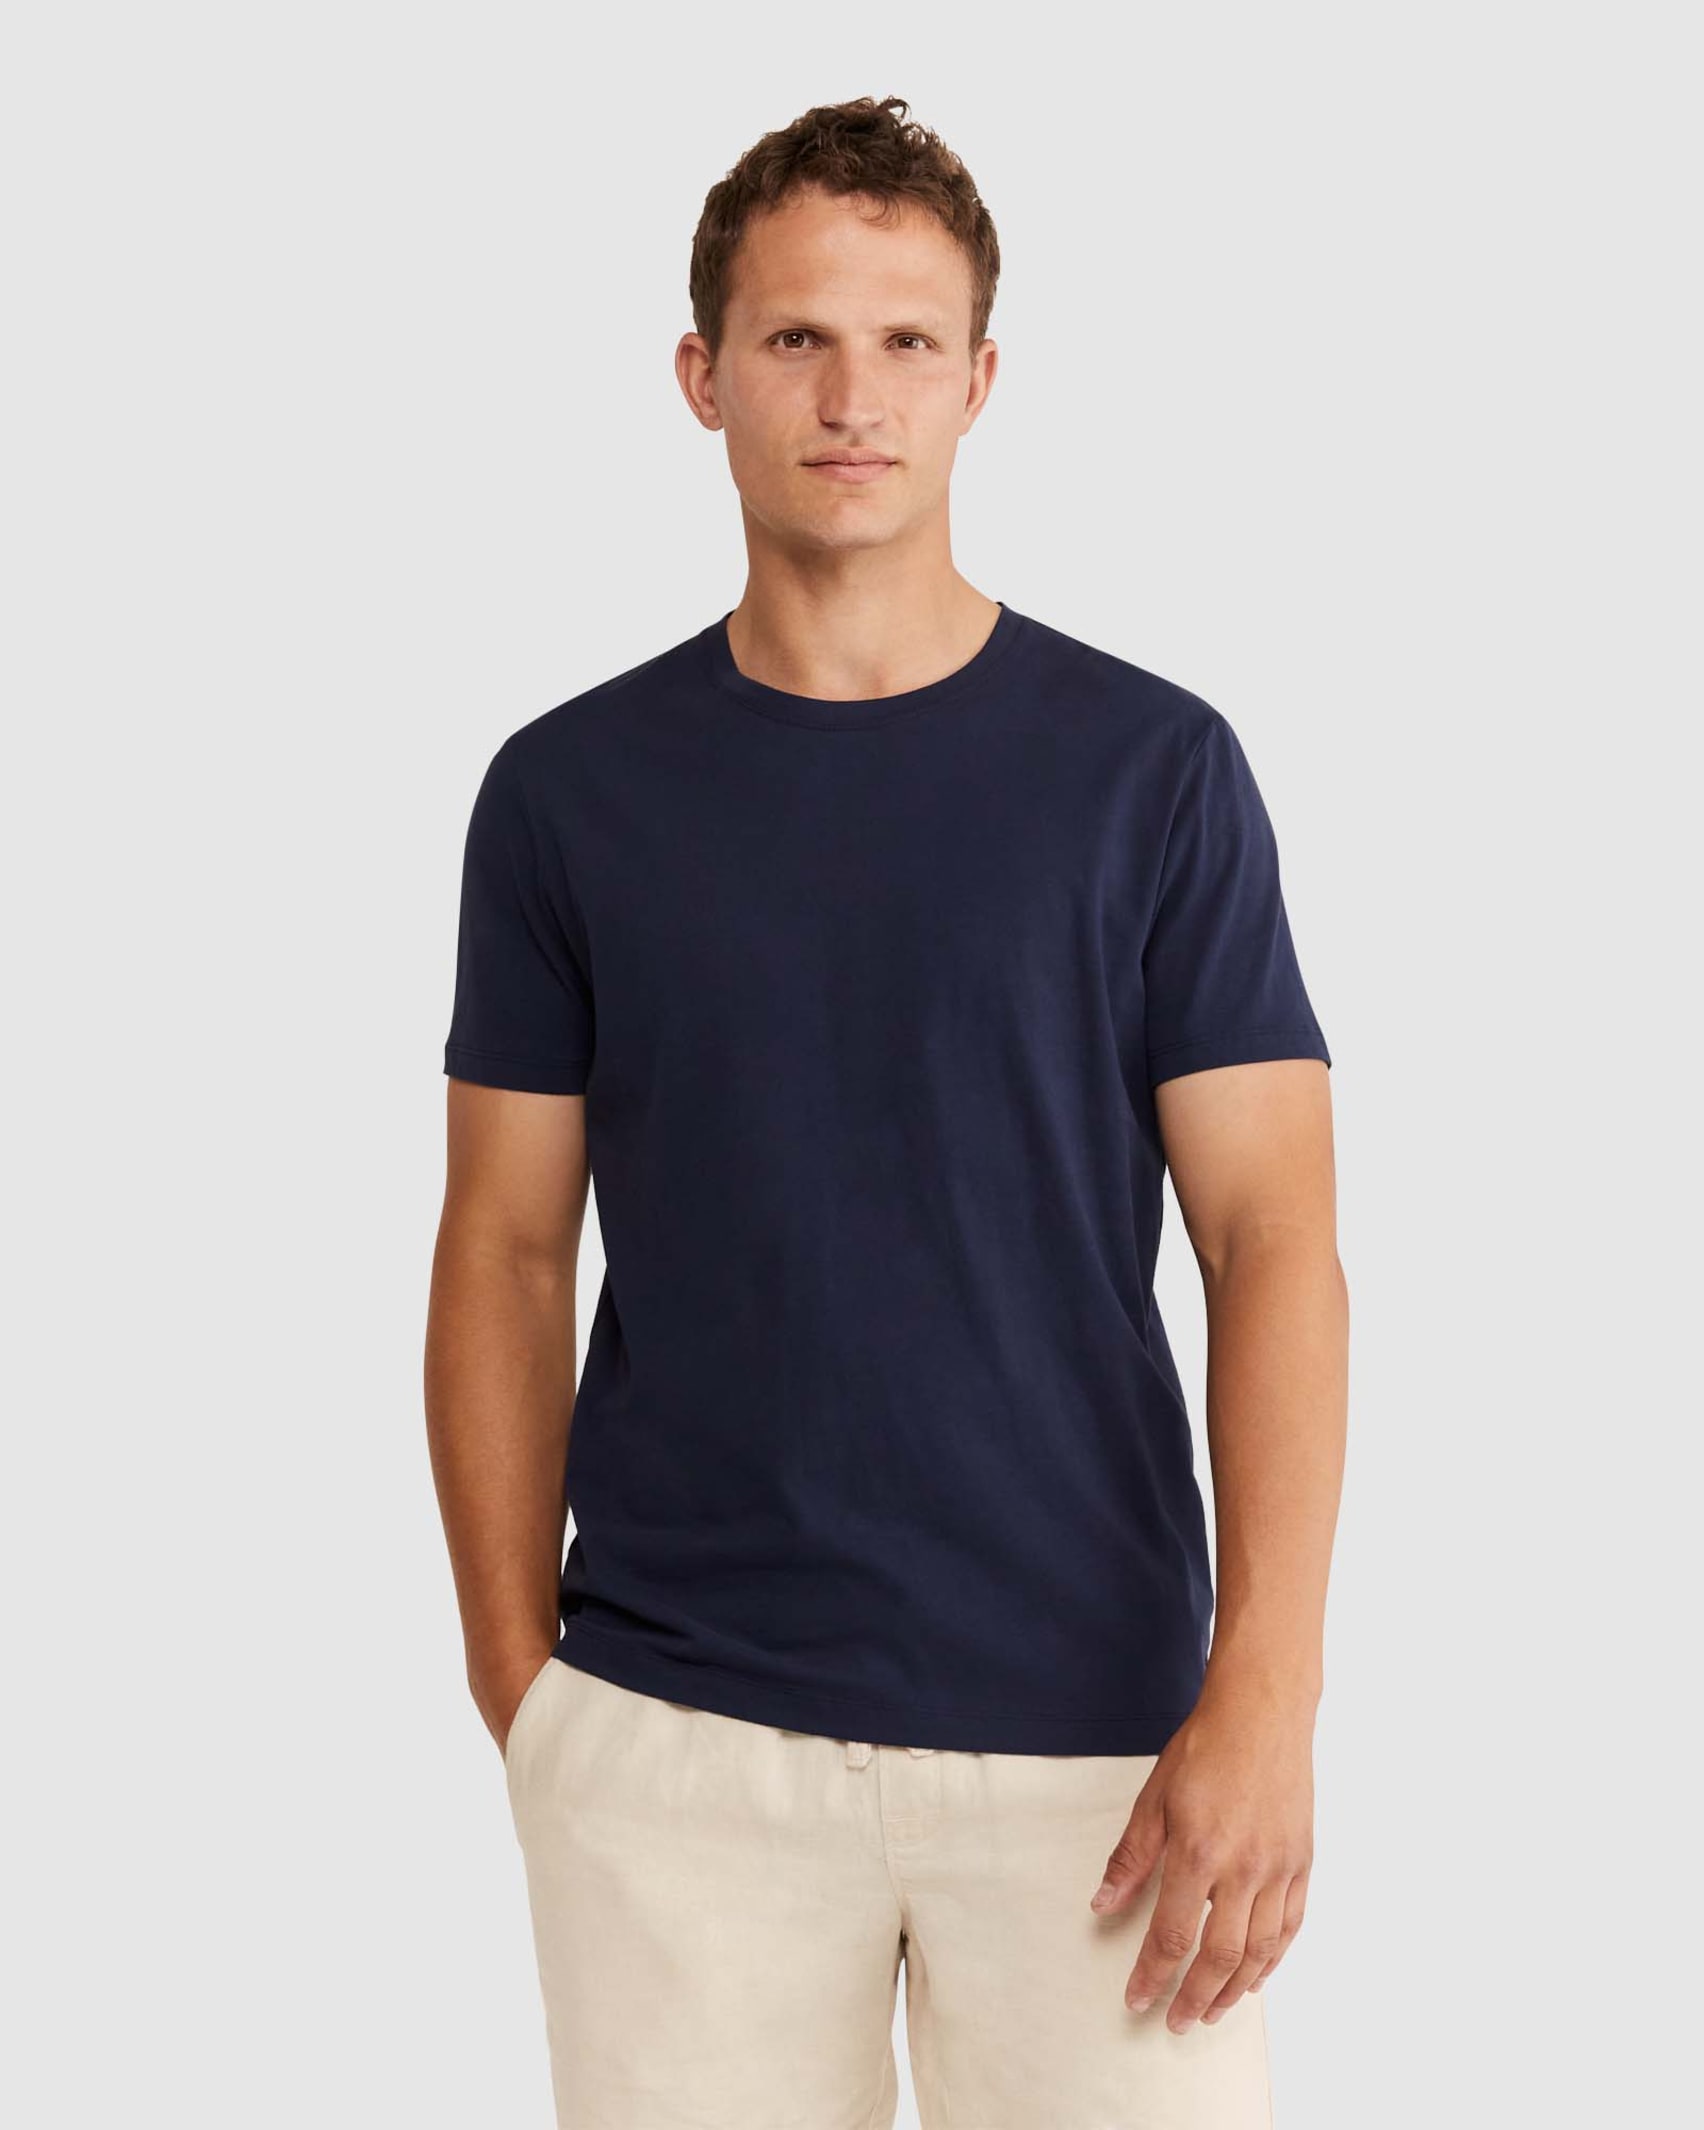 Supersoft Tee in FRENCH NAVY